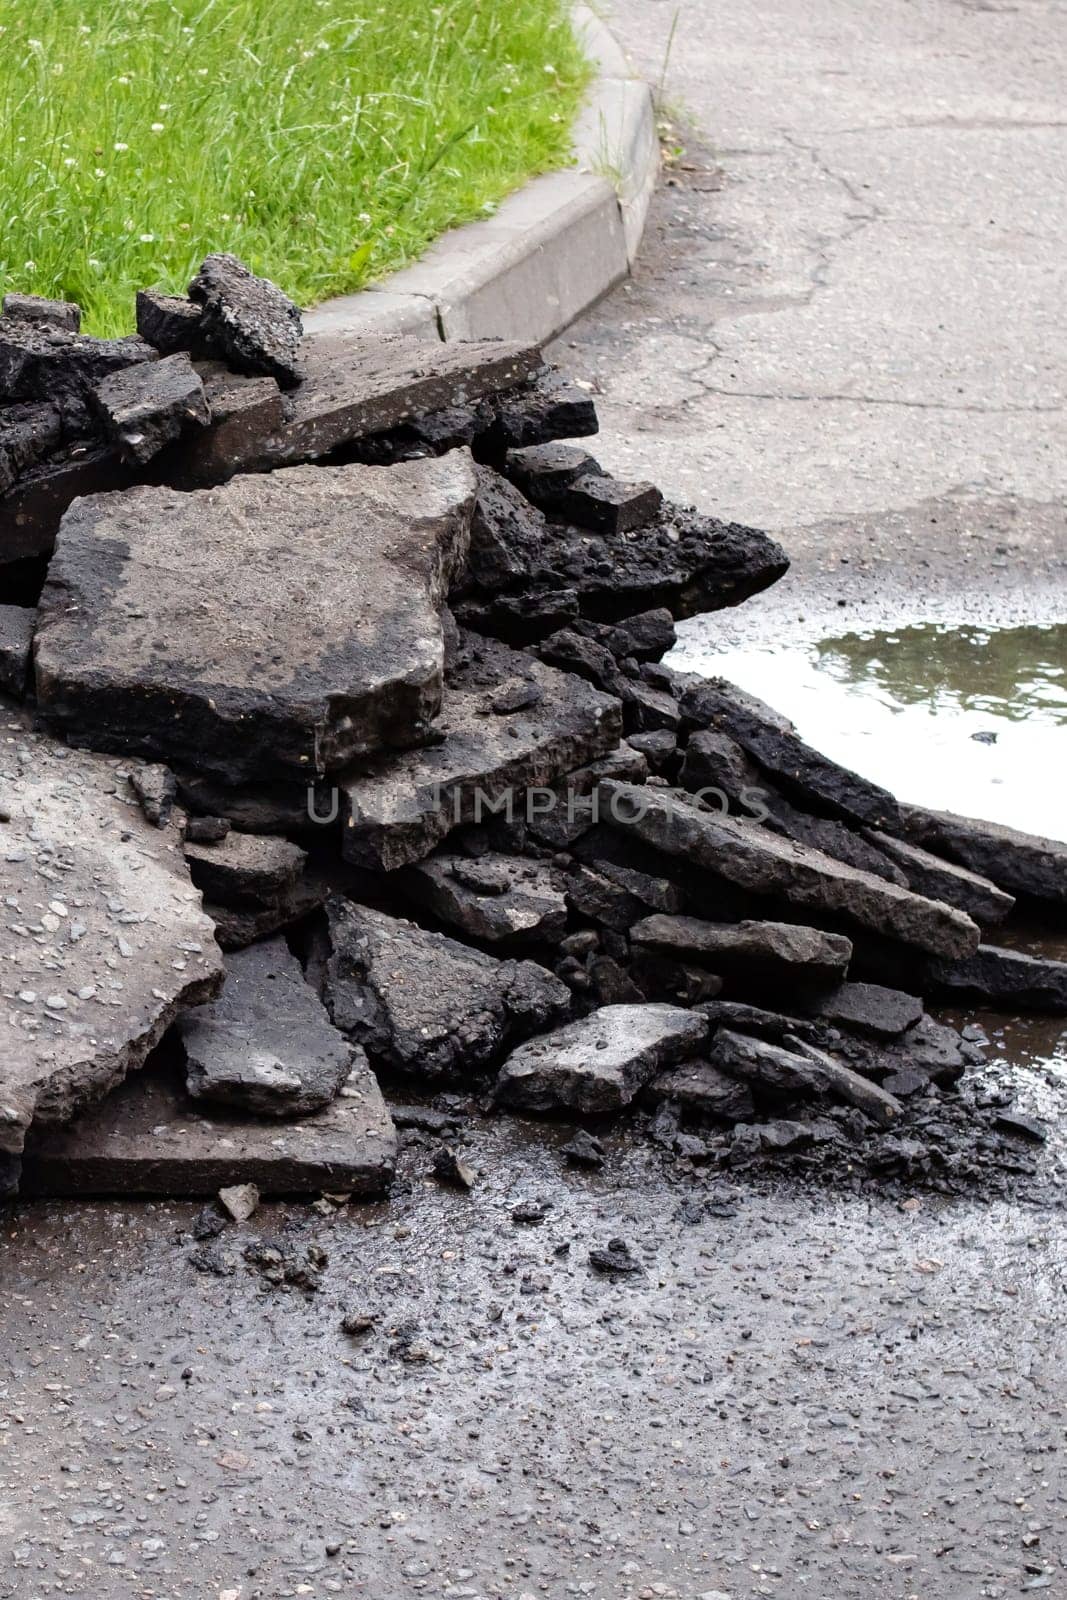 Pieces of asphalt after repair on the road